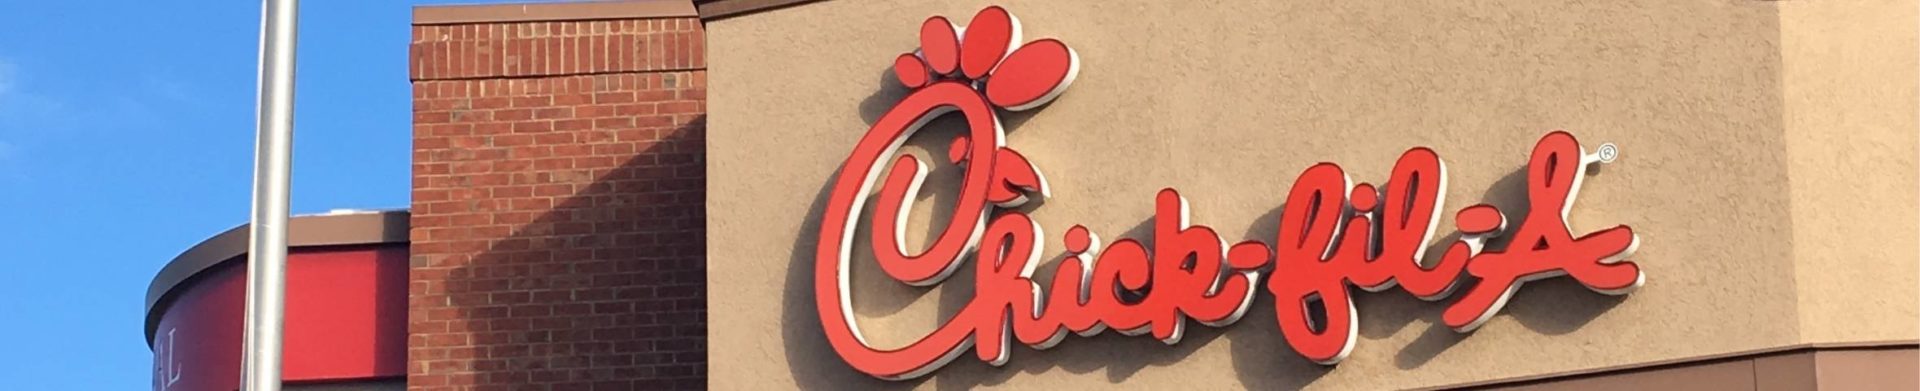 the sign above a Chick-fil-A